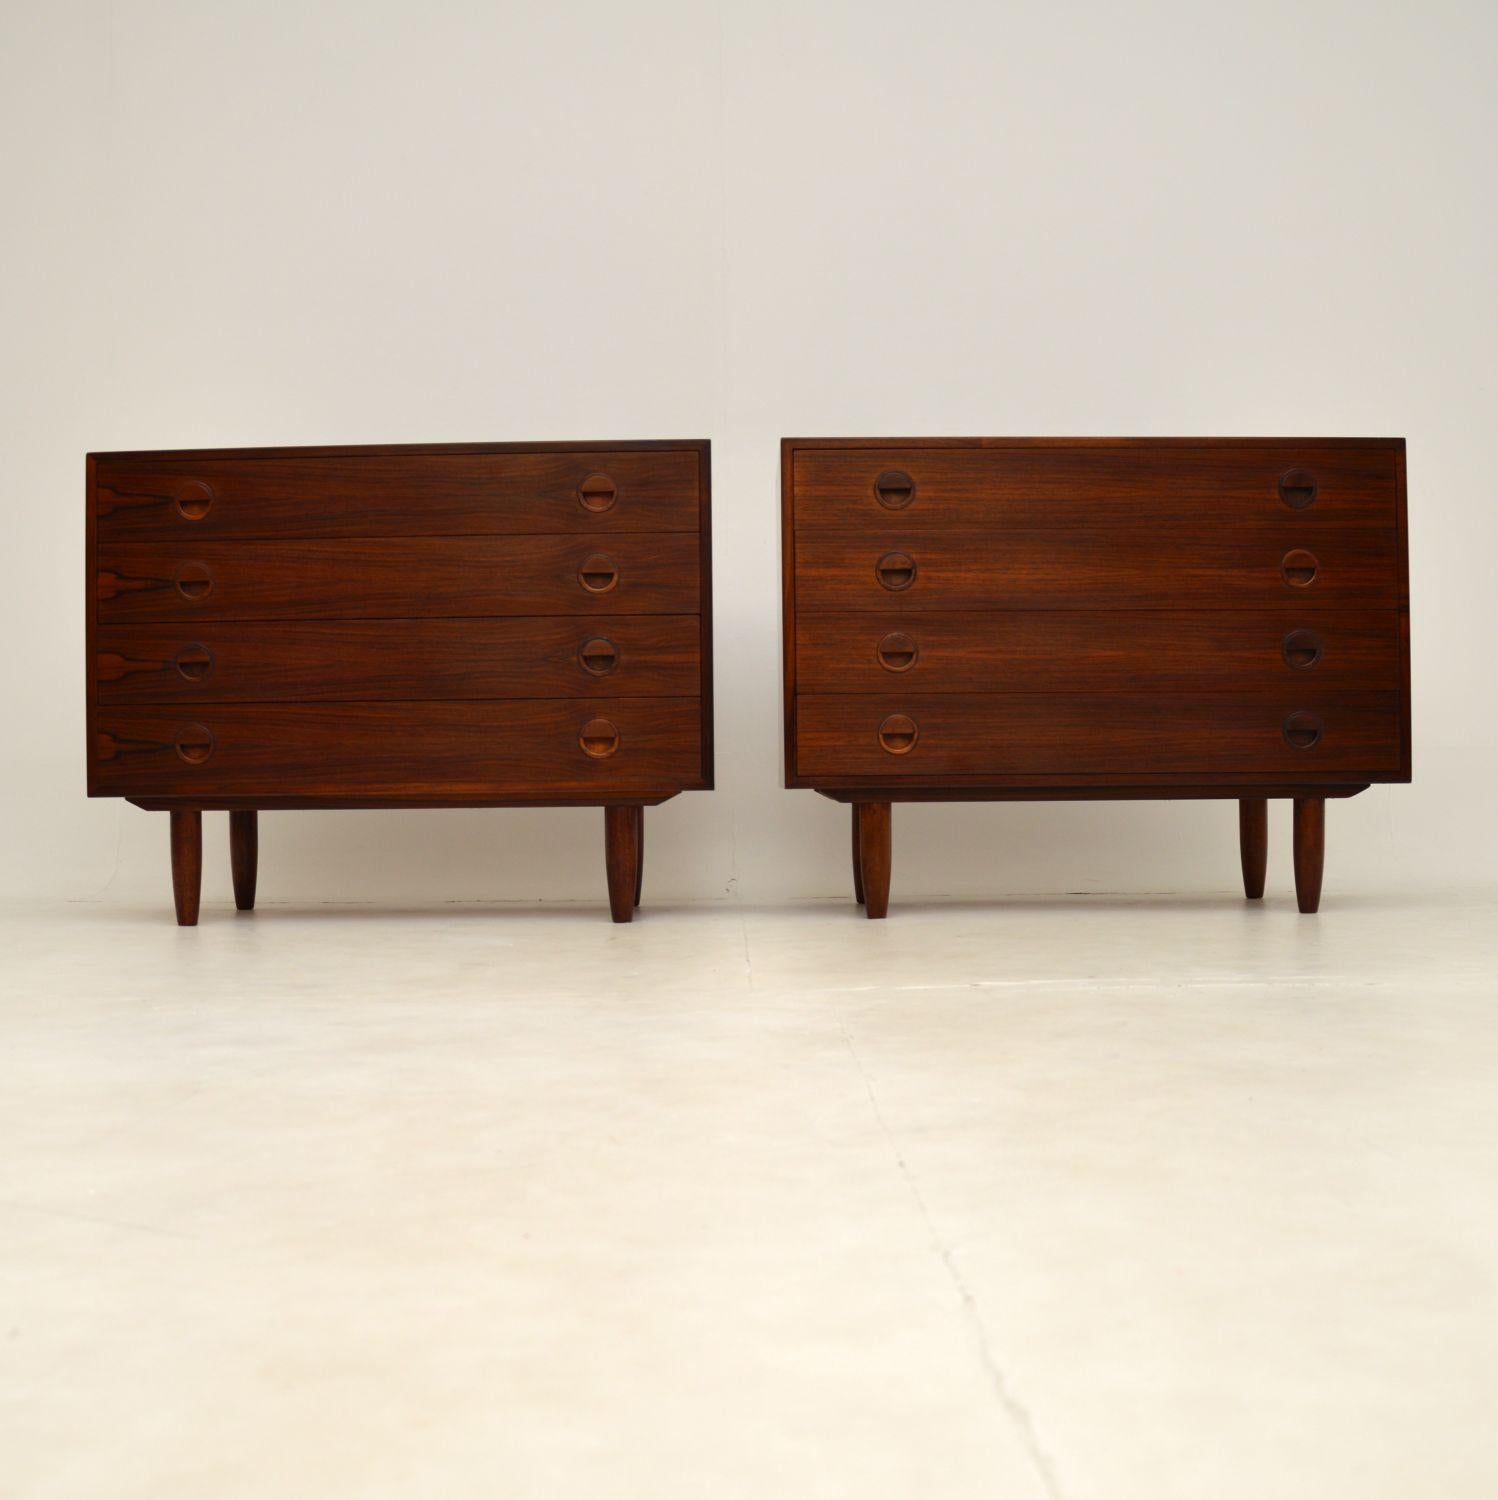 A fantastic and beautifully designed pair of Danish vintage chest of drawers. These were designed by Rud Thygesen and Johnny Sørensen, they were made in Denmark by Hansen and Guldborg in the 1960’s.

The quality is absolutely superb and these are